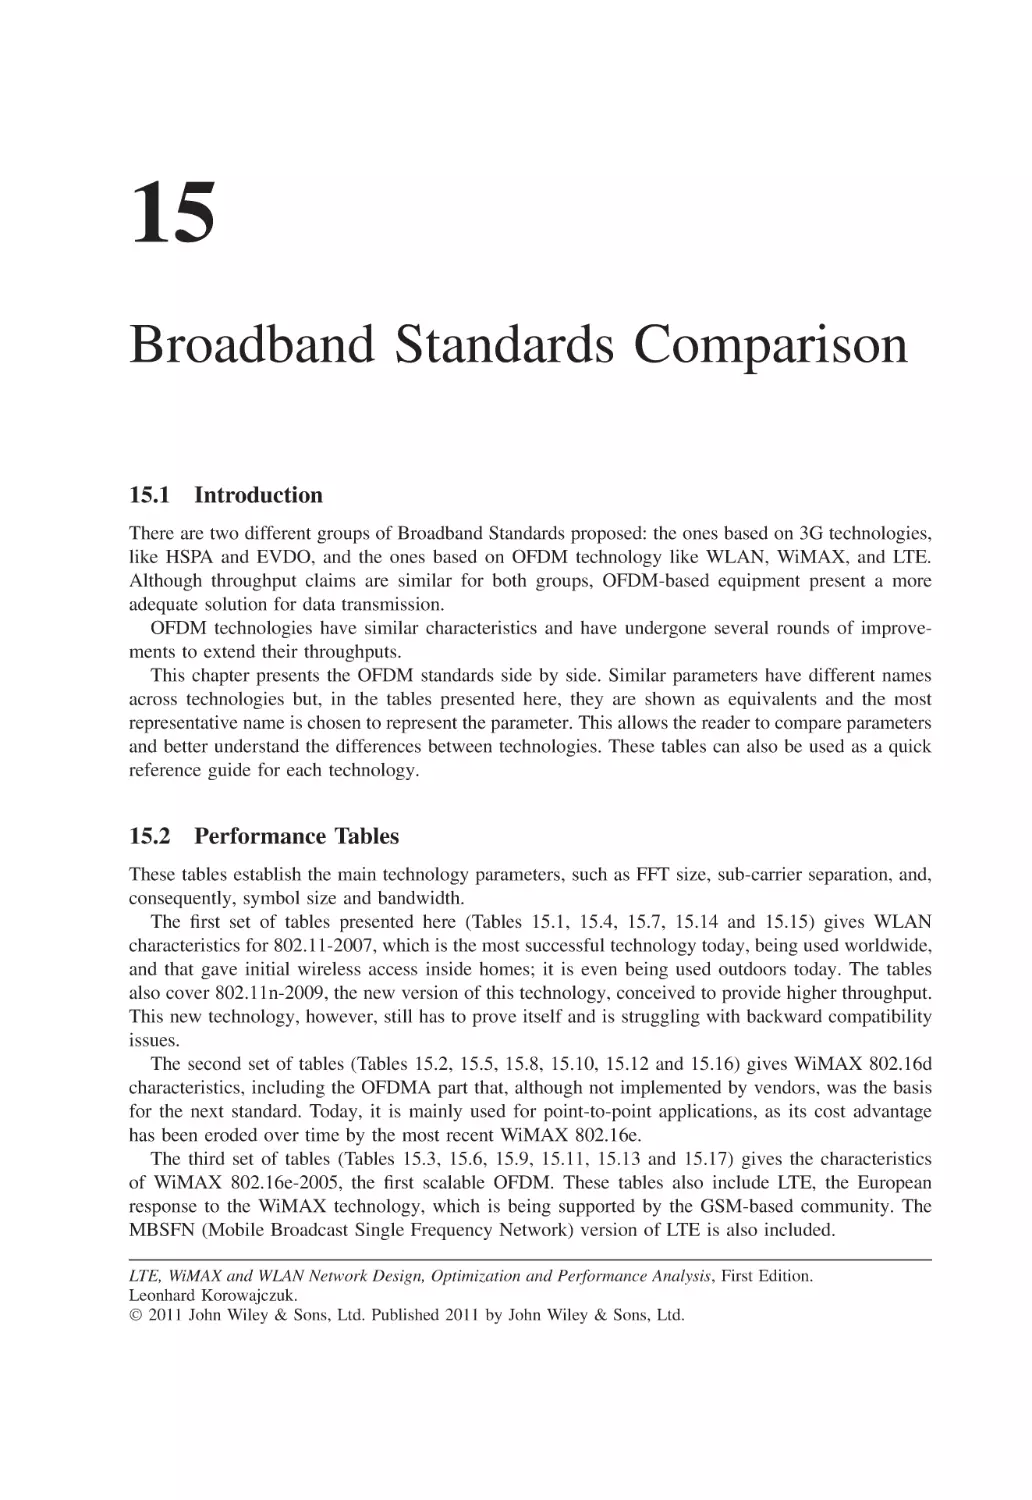 15 Broadband Standards Comparison
15.1 Introduction
15.2 Performance Tables